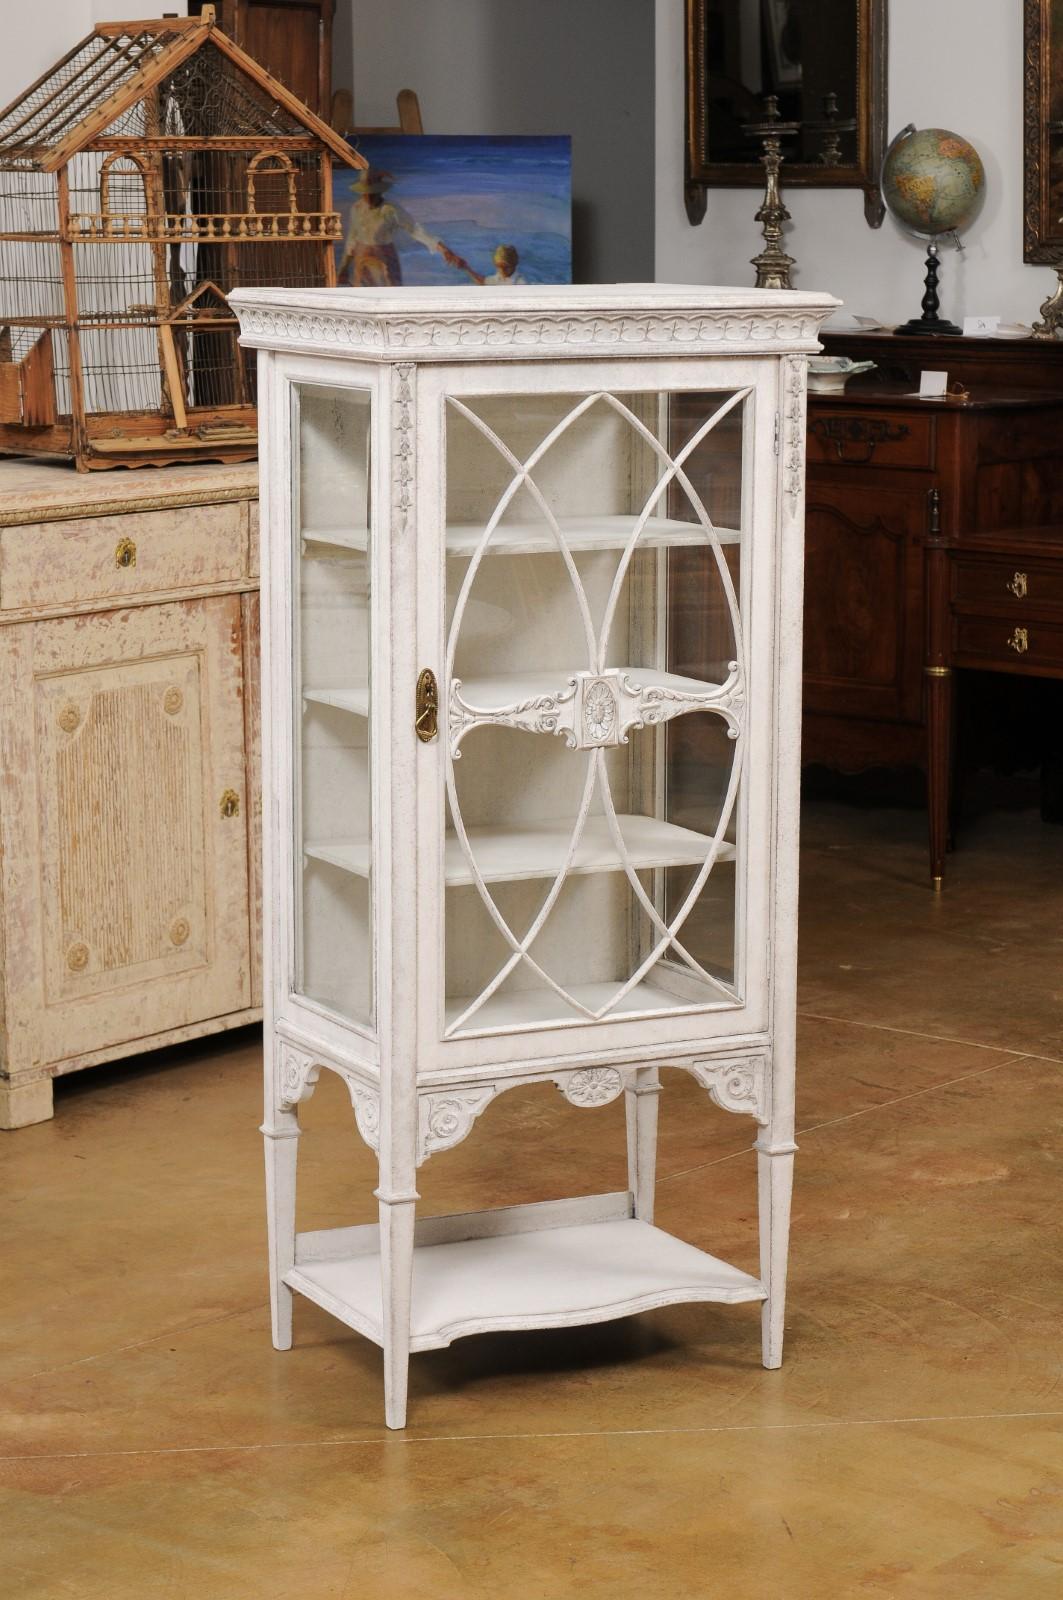 European 1890s Painted Vitrine Cabinet with Glass Door and Richly Carved Décor In Good Condition For Sale In Atlanta, GA